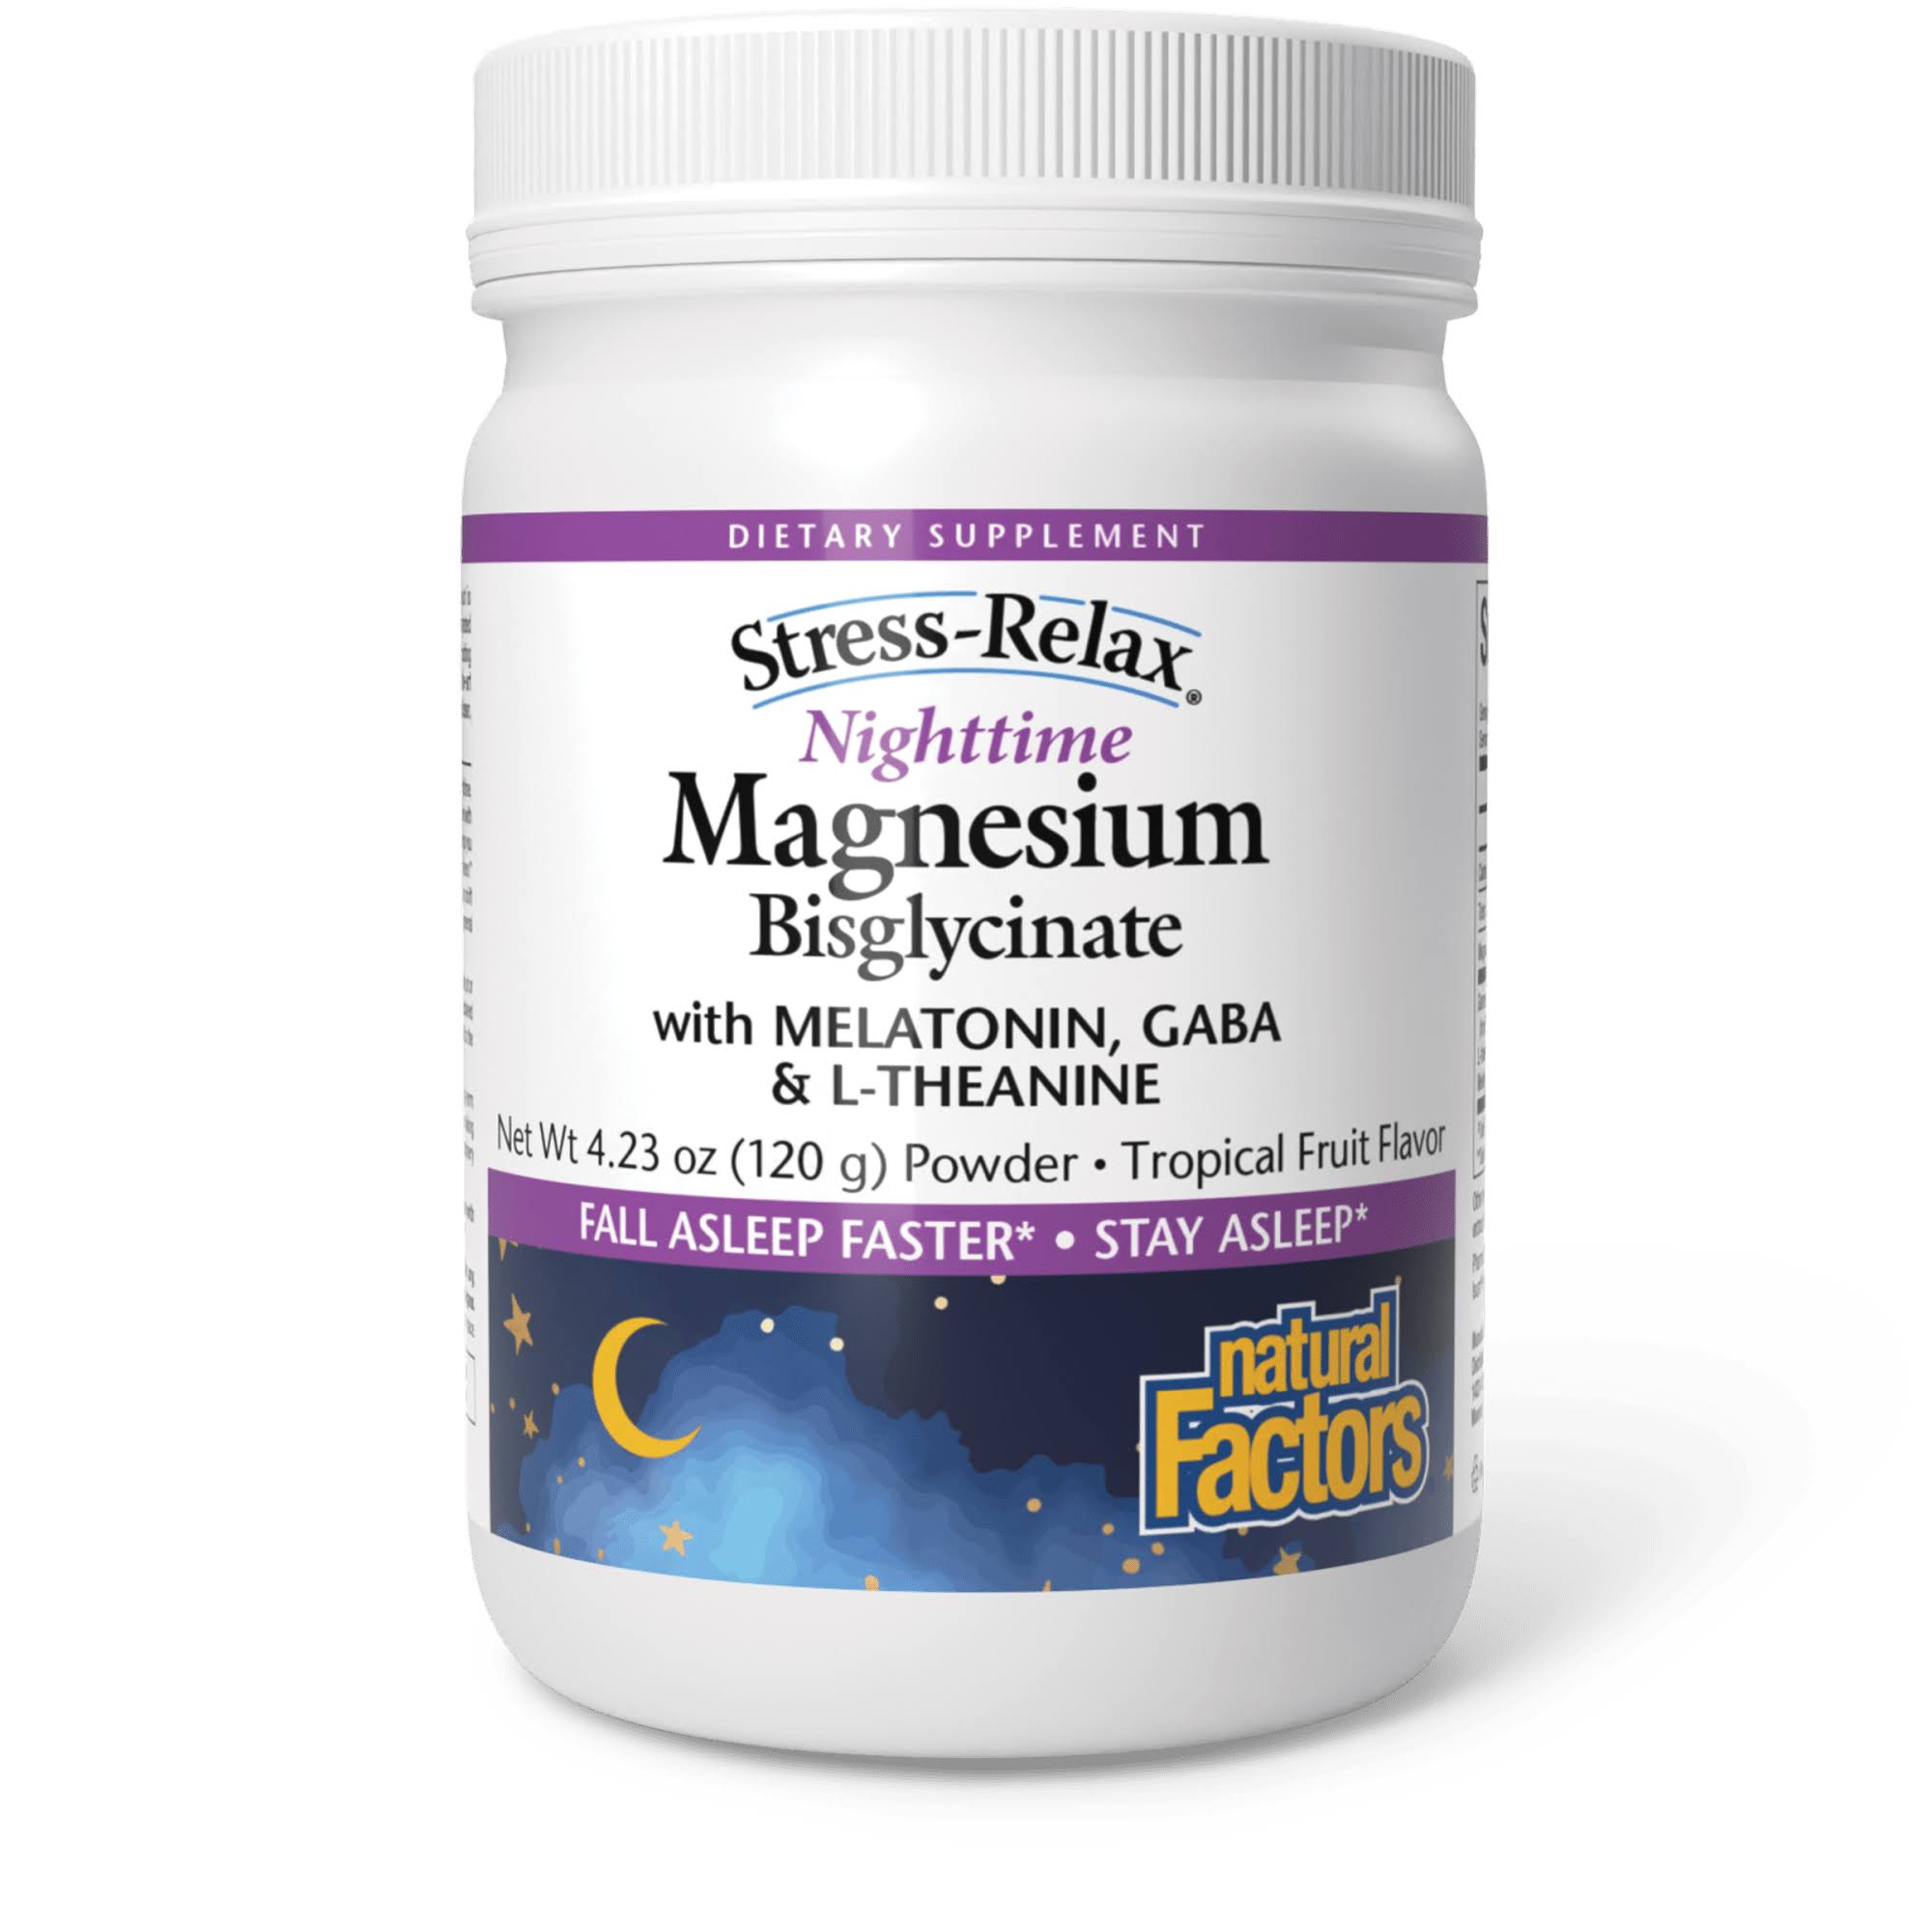 Natural Factors, Stress-Relax, Nighttime Magnesium Bisglycinate with Melatonin, Gaba & L-Theanine, Tropical Fruit, 4.23 oz (120 g)